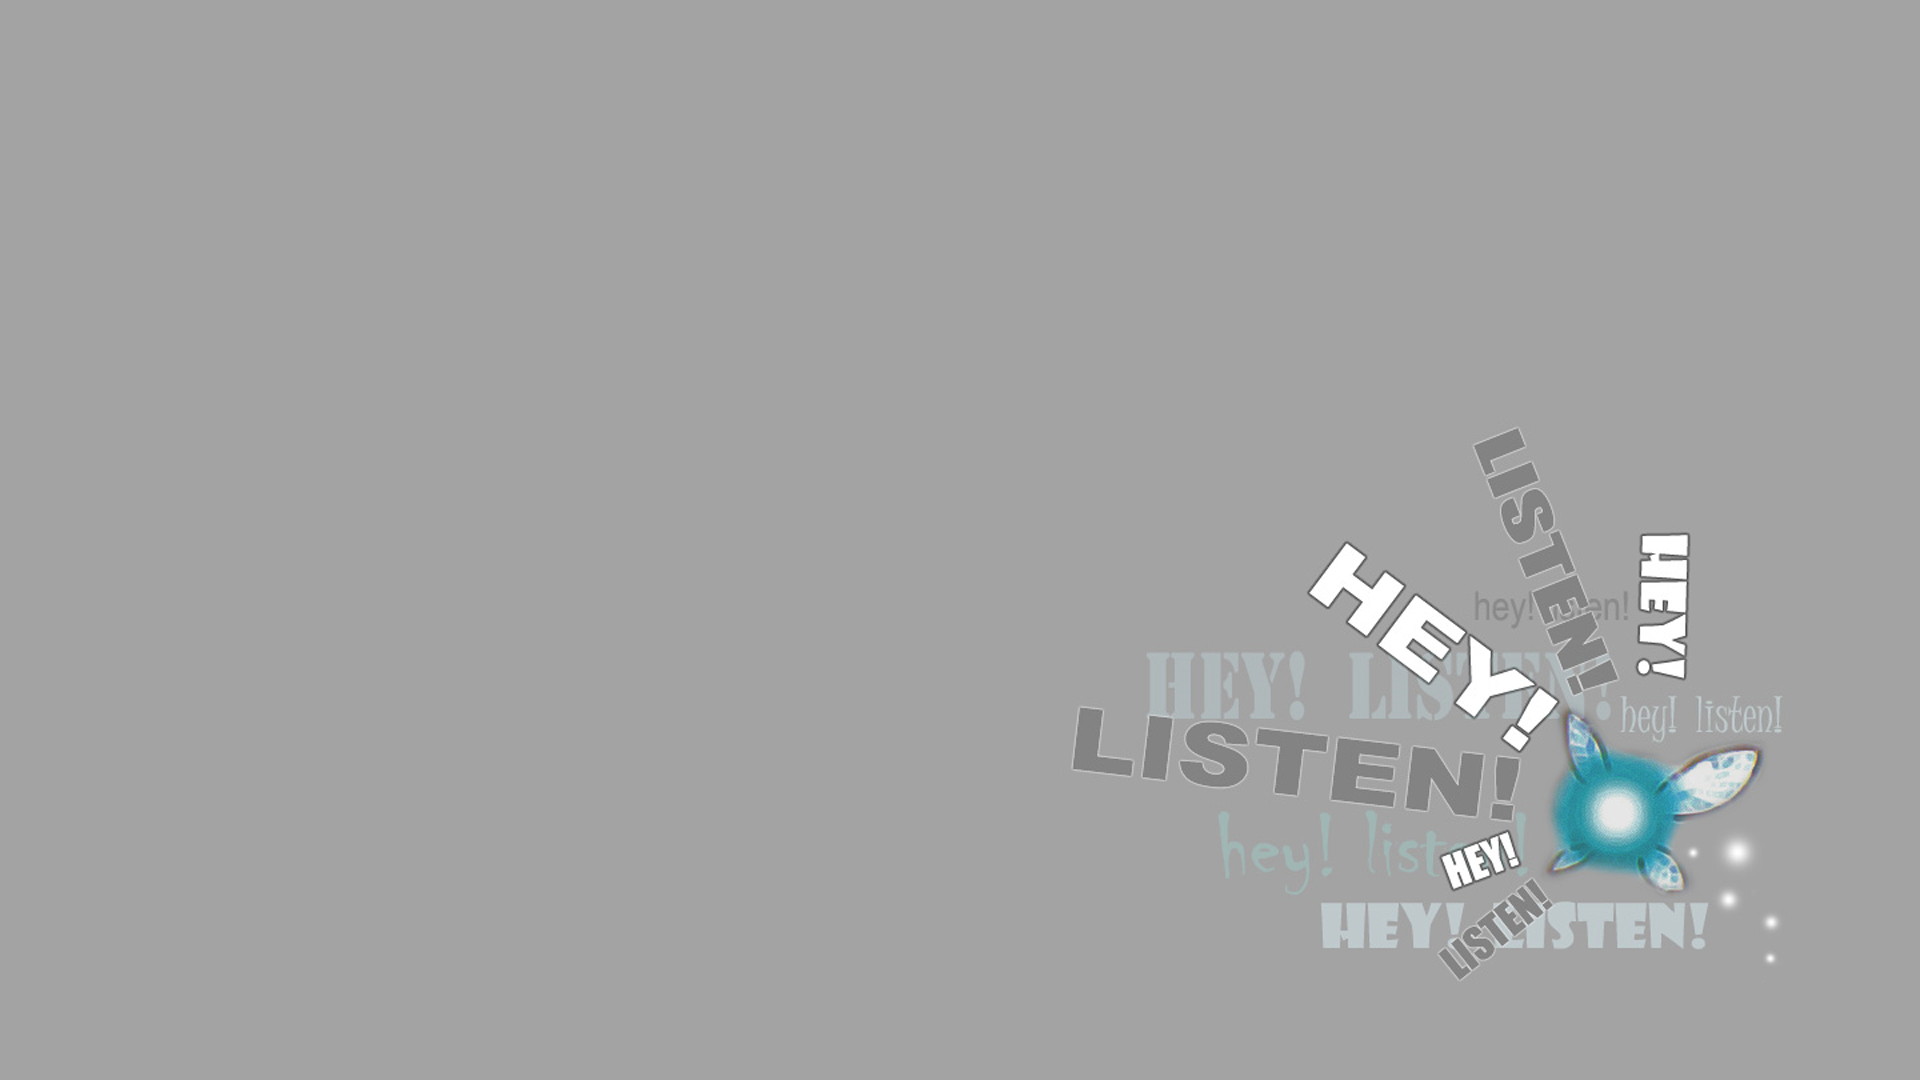 General 1920x1080 navi simple background video games The Legend of Zelda gray background typography